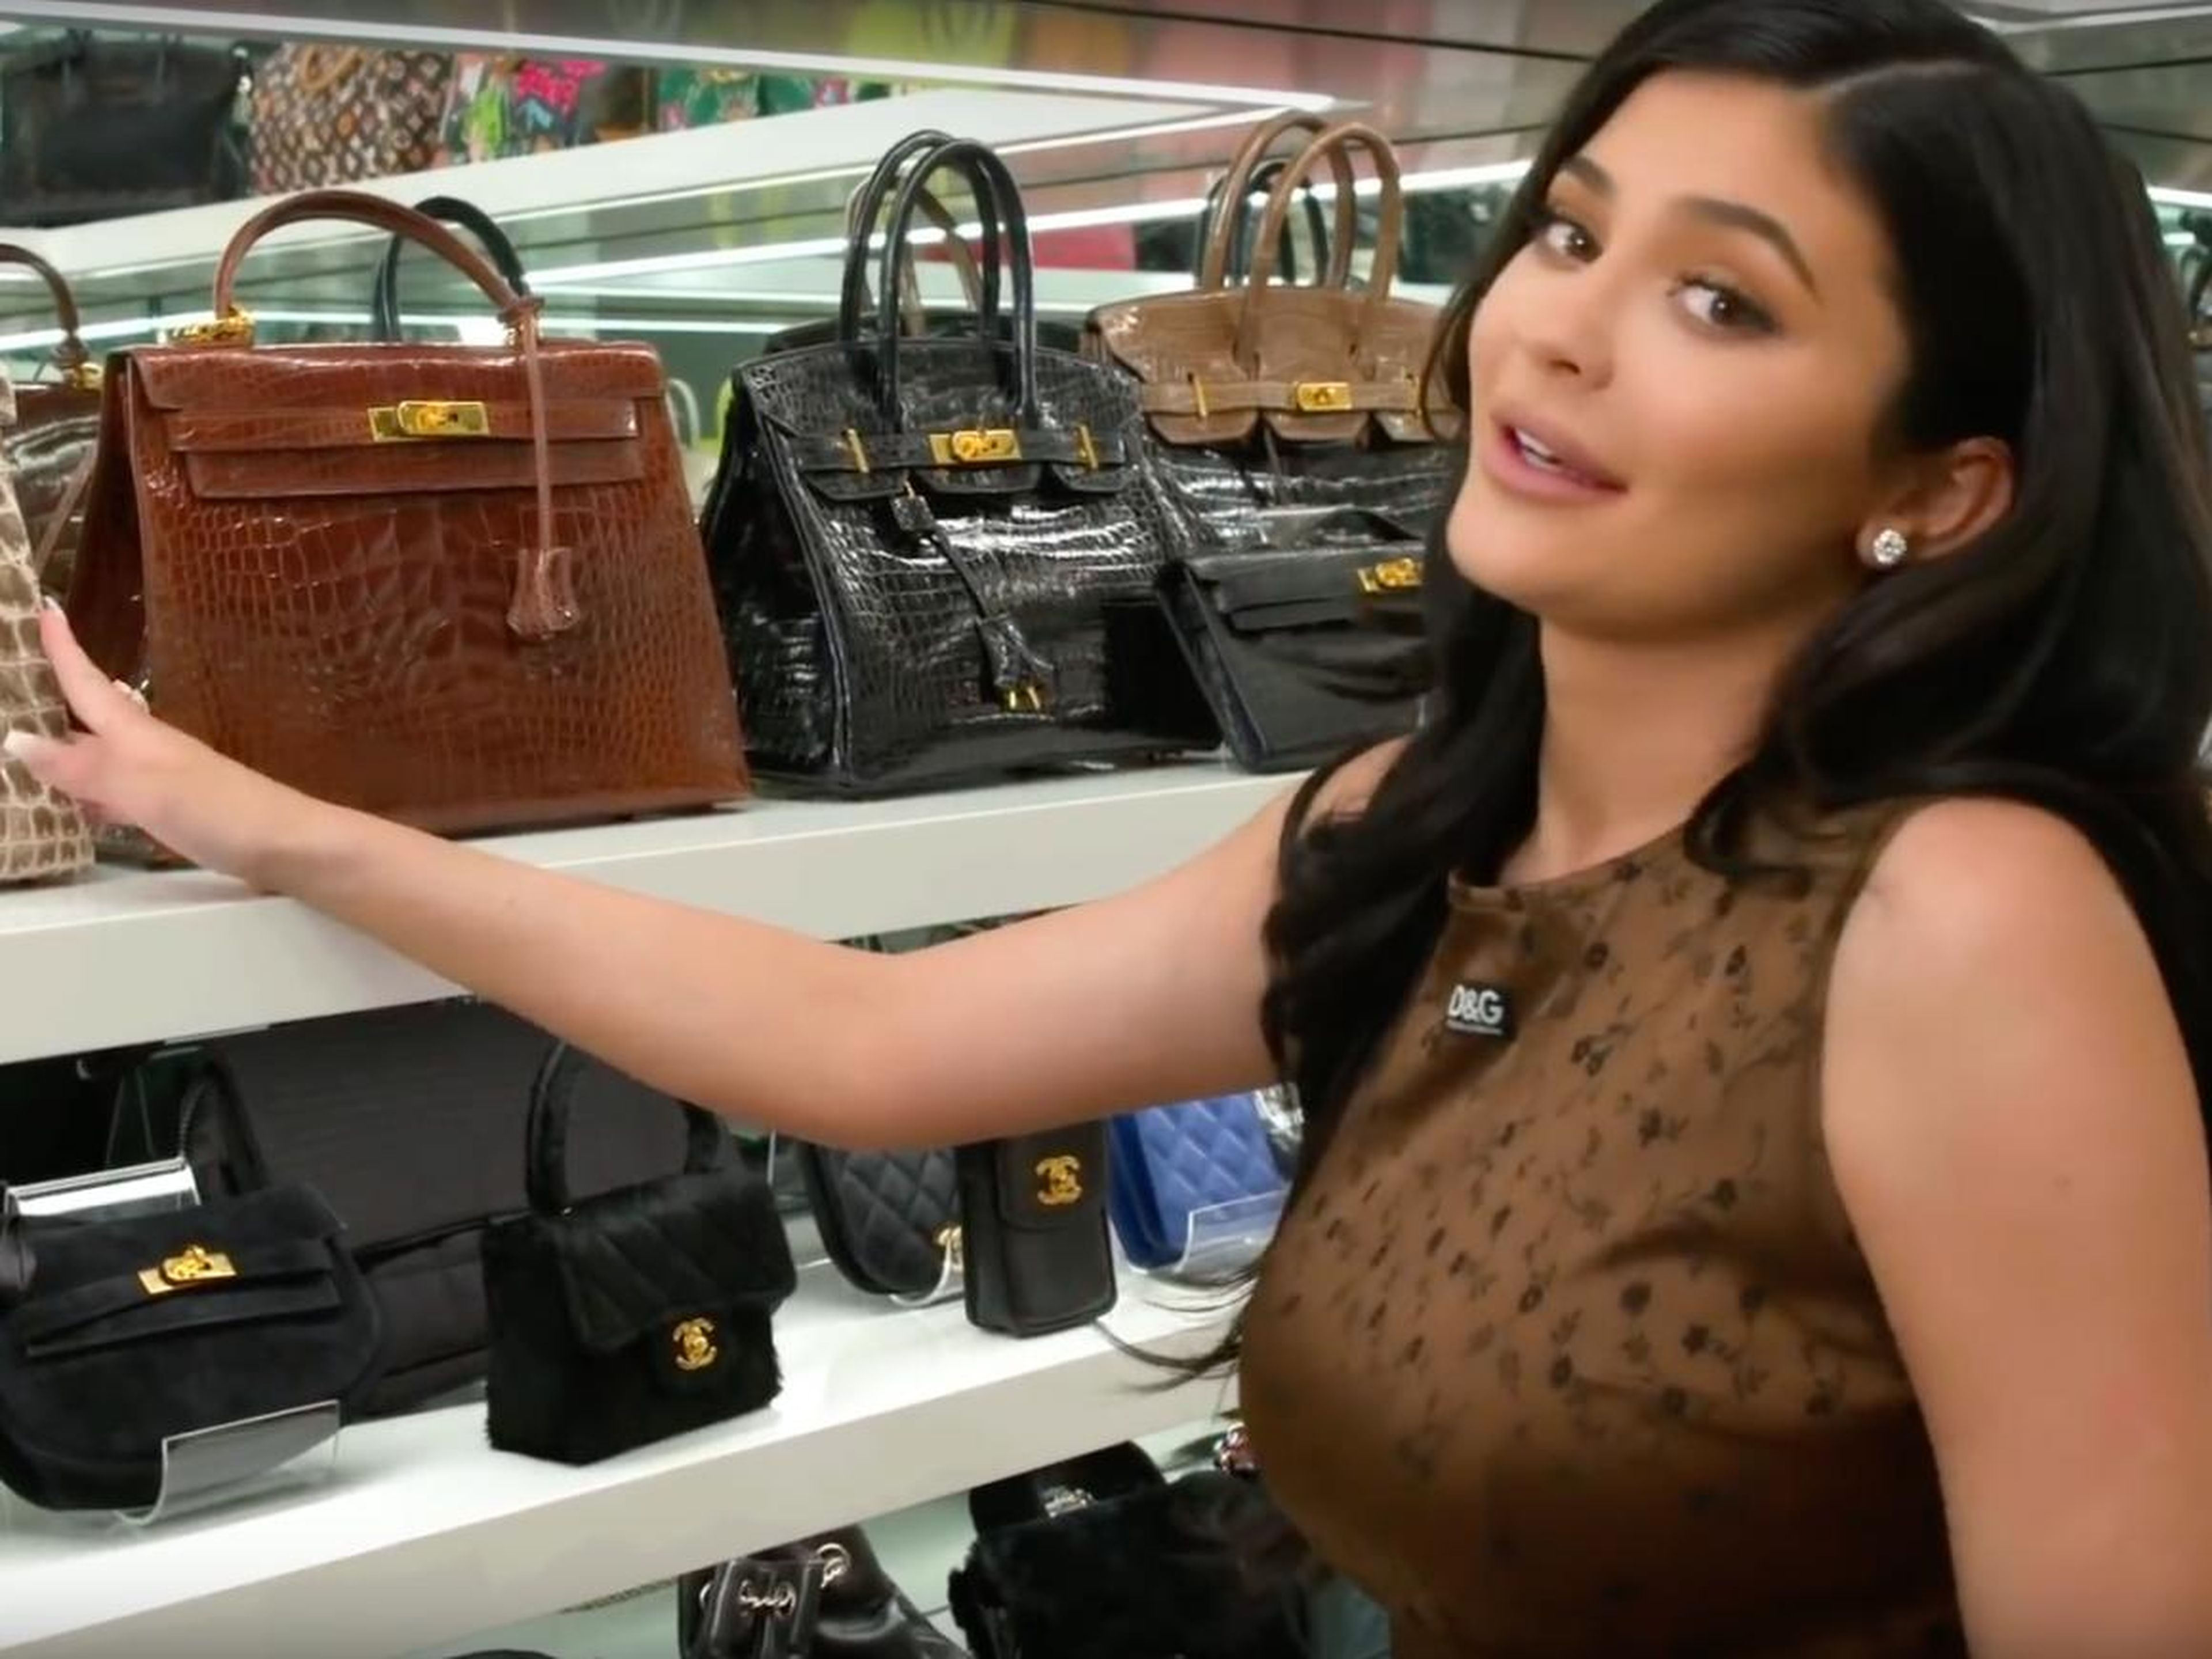 Kylie Jenner, the world's youngest "self-made" billionaire, has been collecting designer handbags "for a minute."